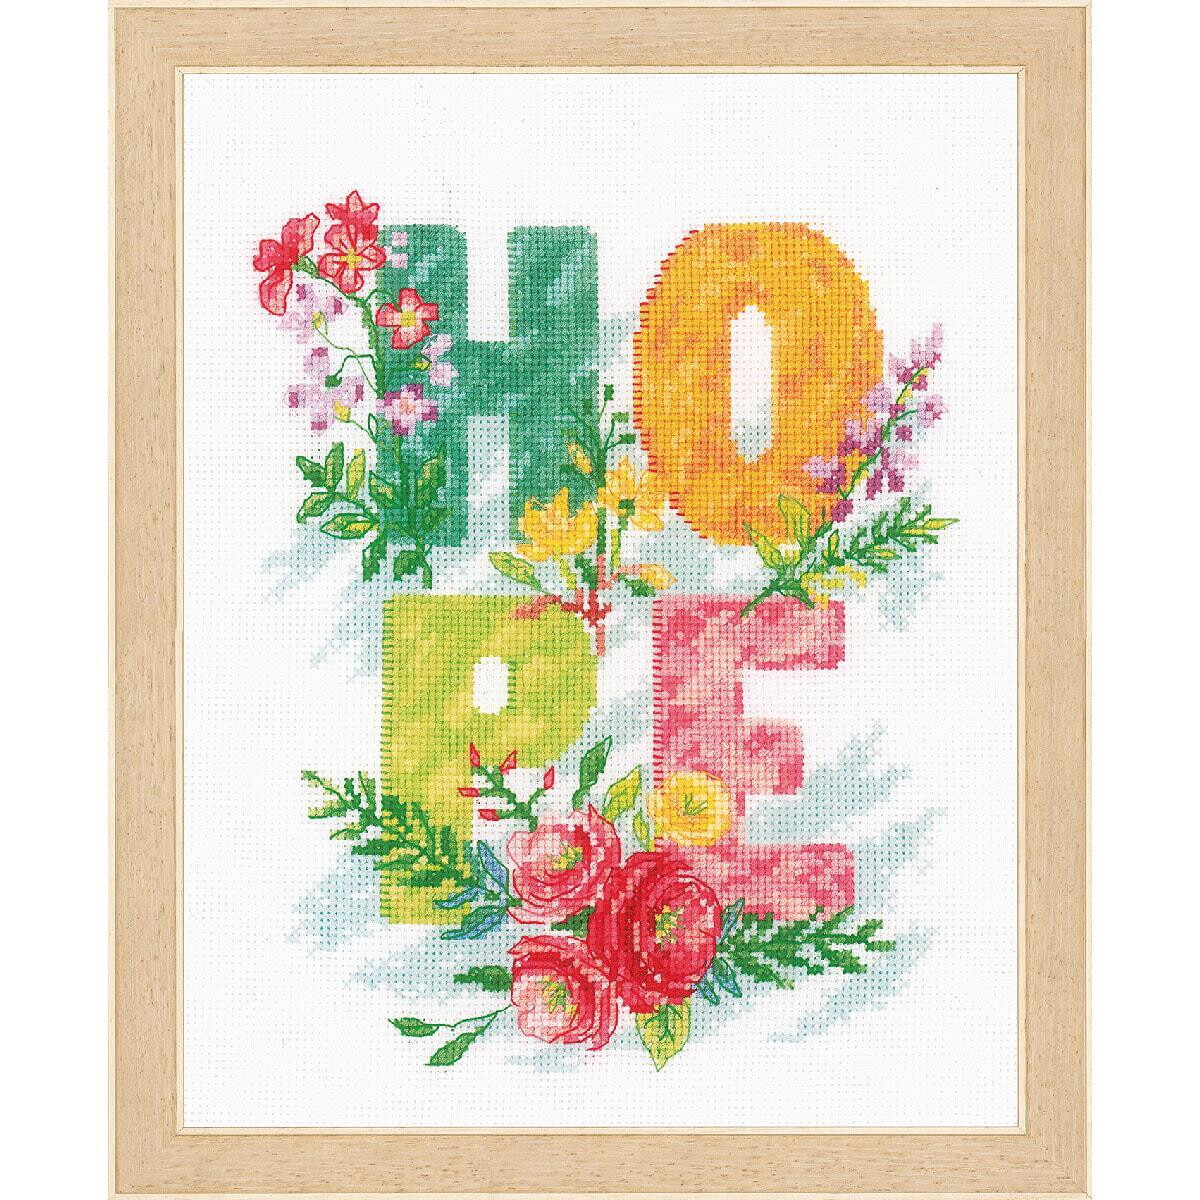 Vervaco counted cross stitch kit "Hope",...